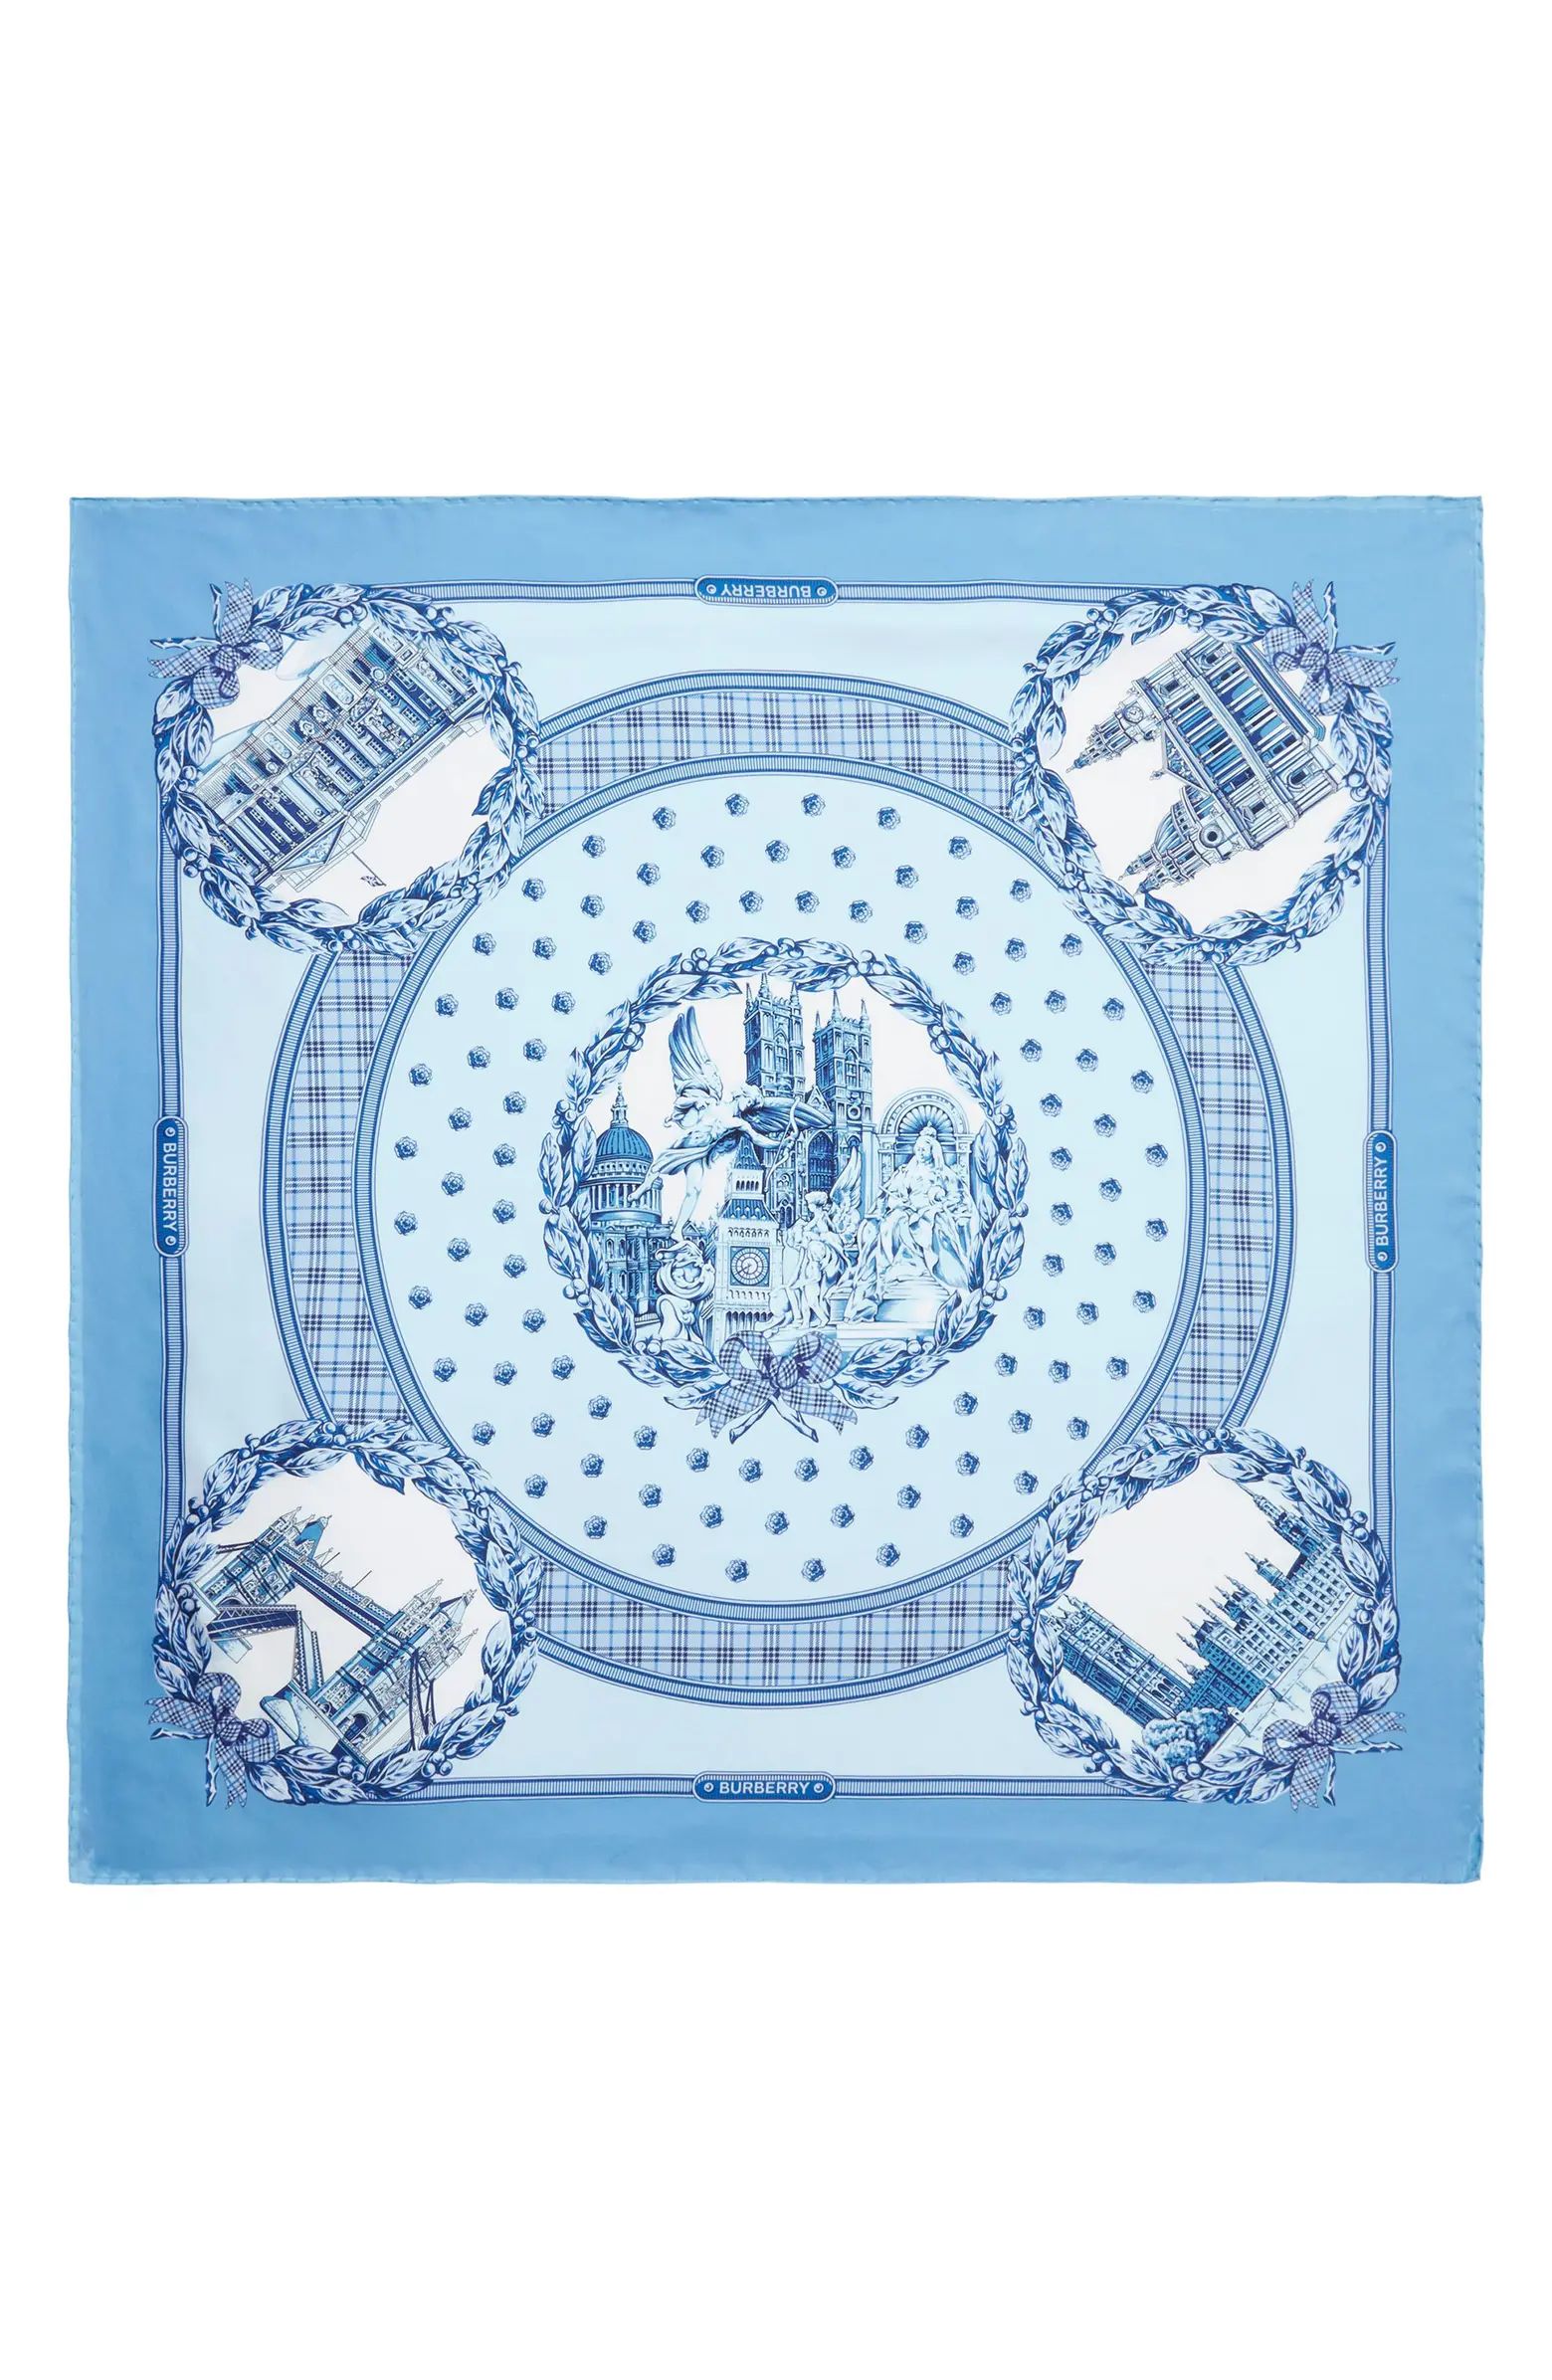 London Monuments Square Silk Scarf | Nordstrom